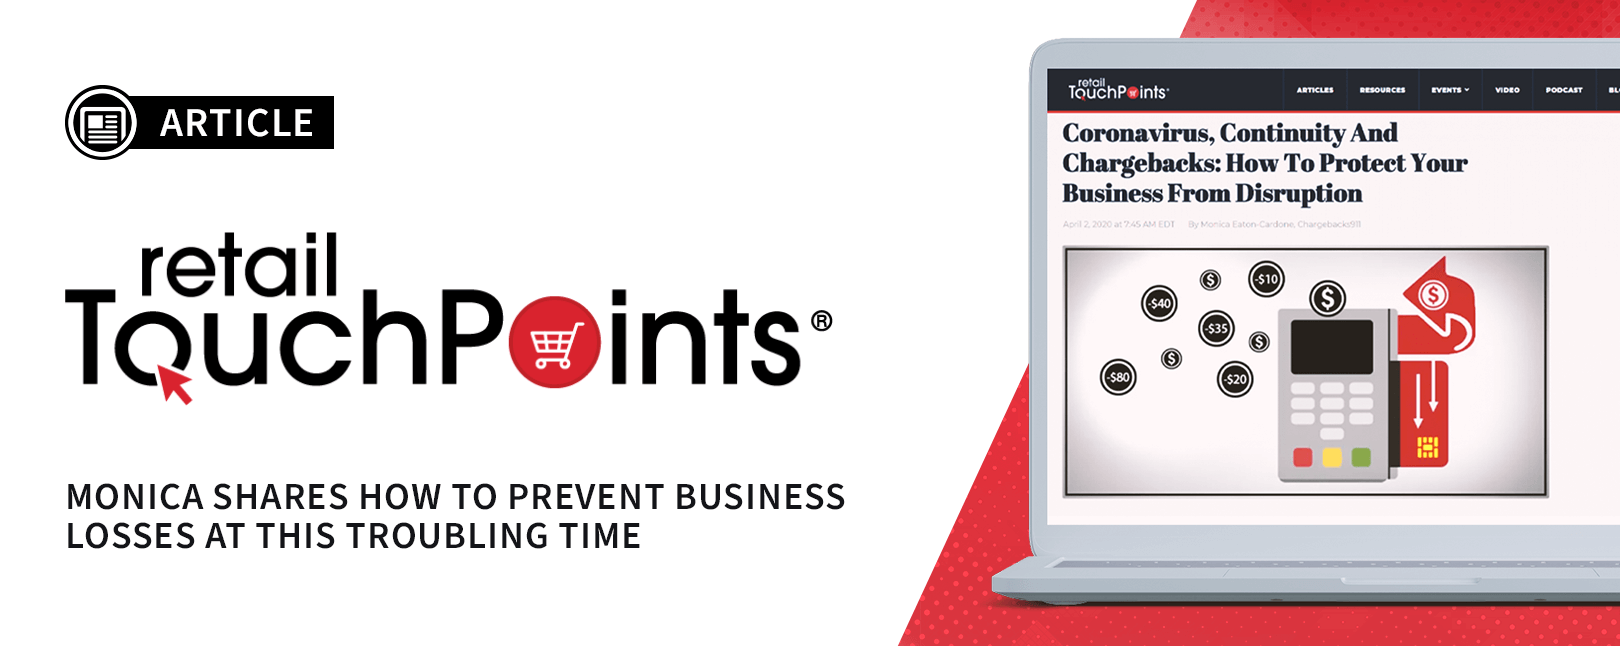 Coronavirus, Continuity & Chargebacks: How to Protect Your Business From Disruption